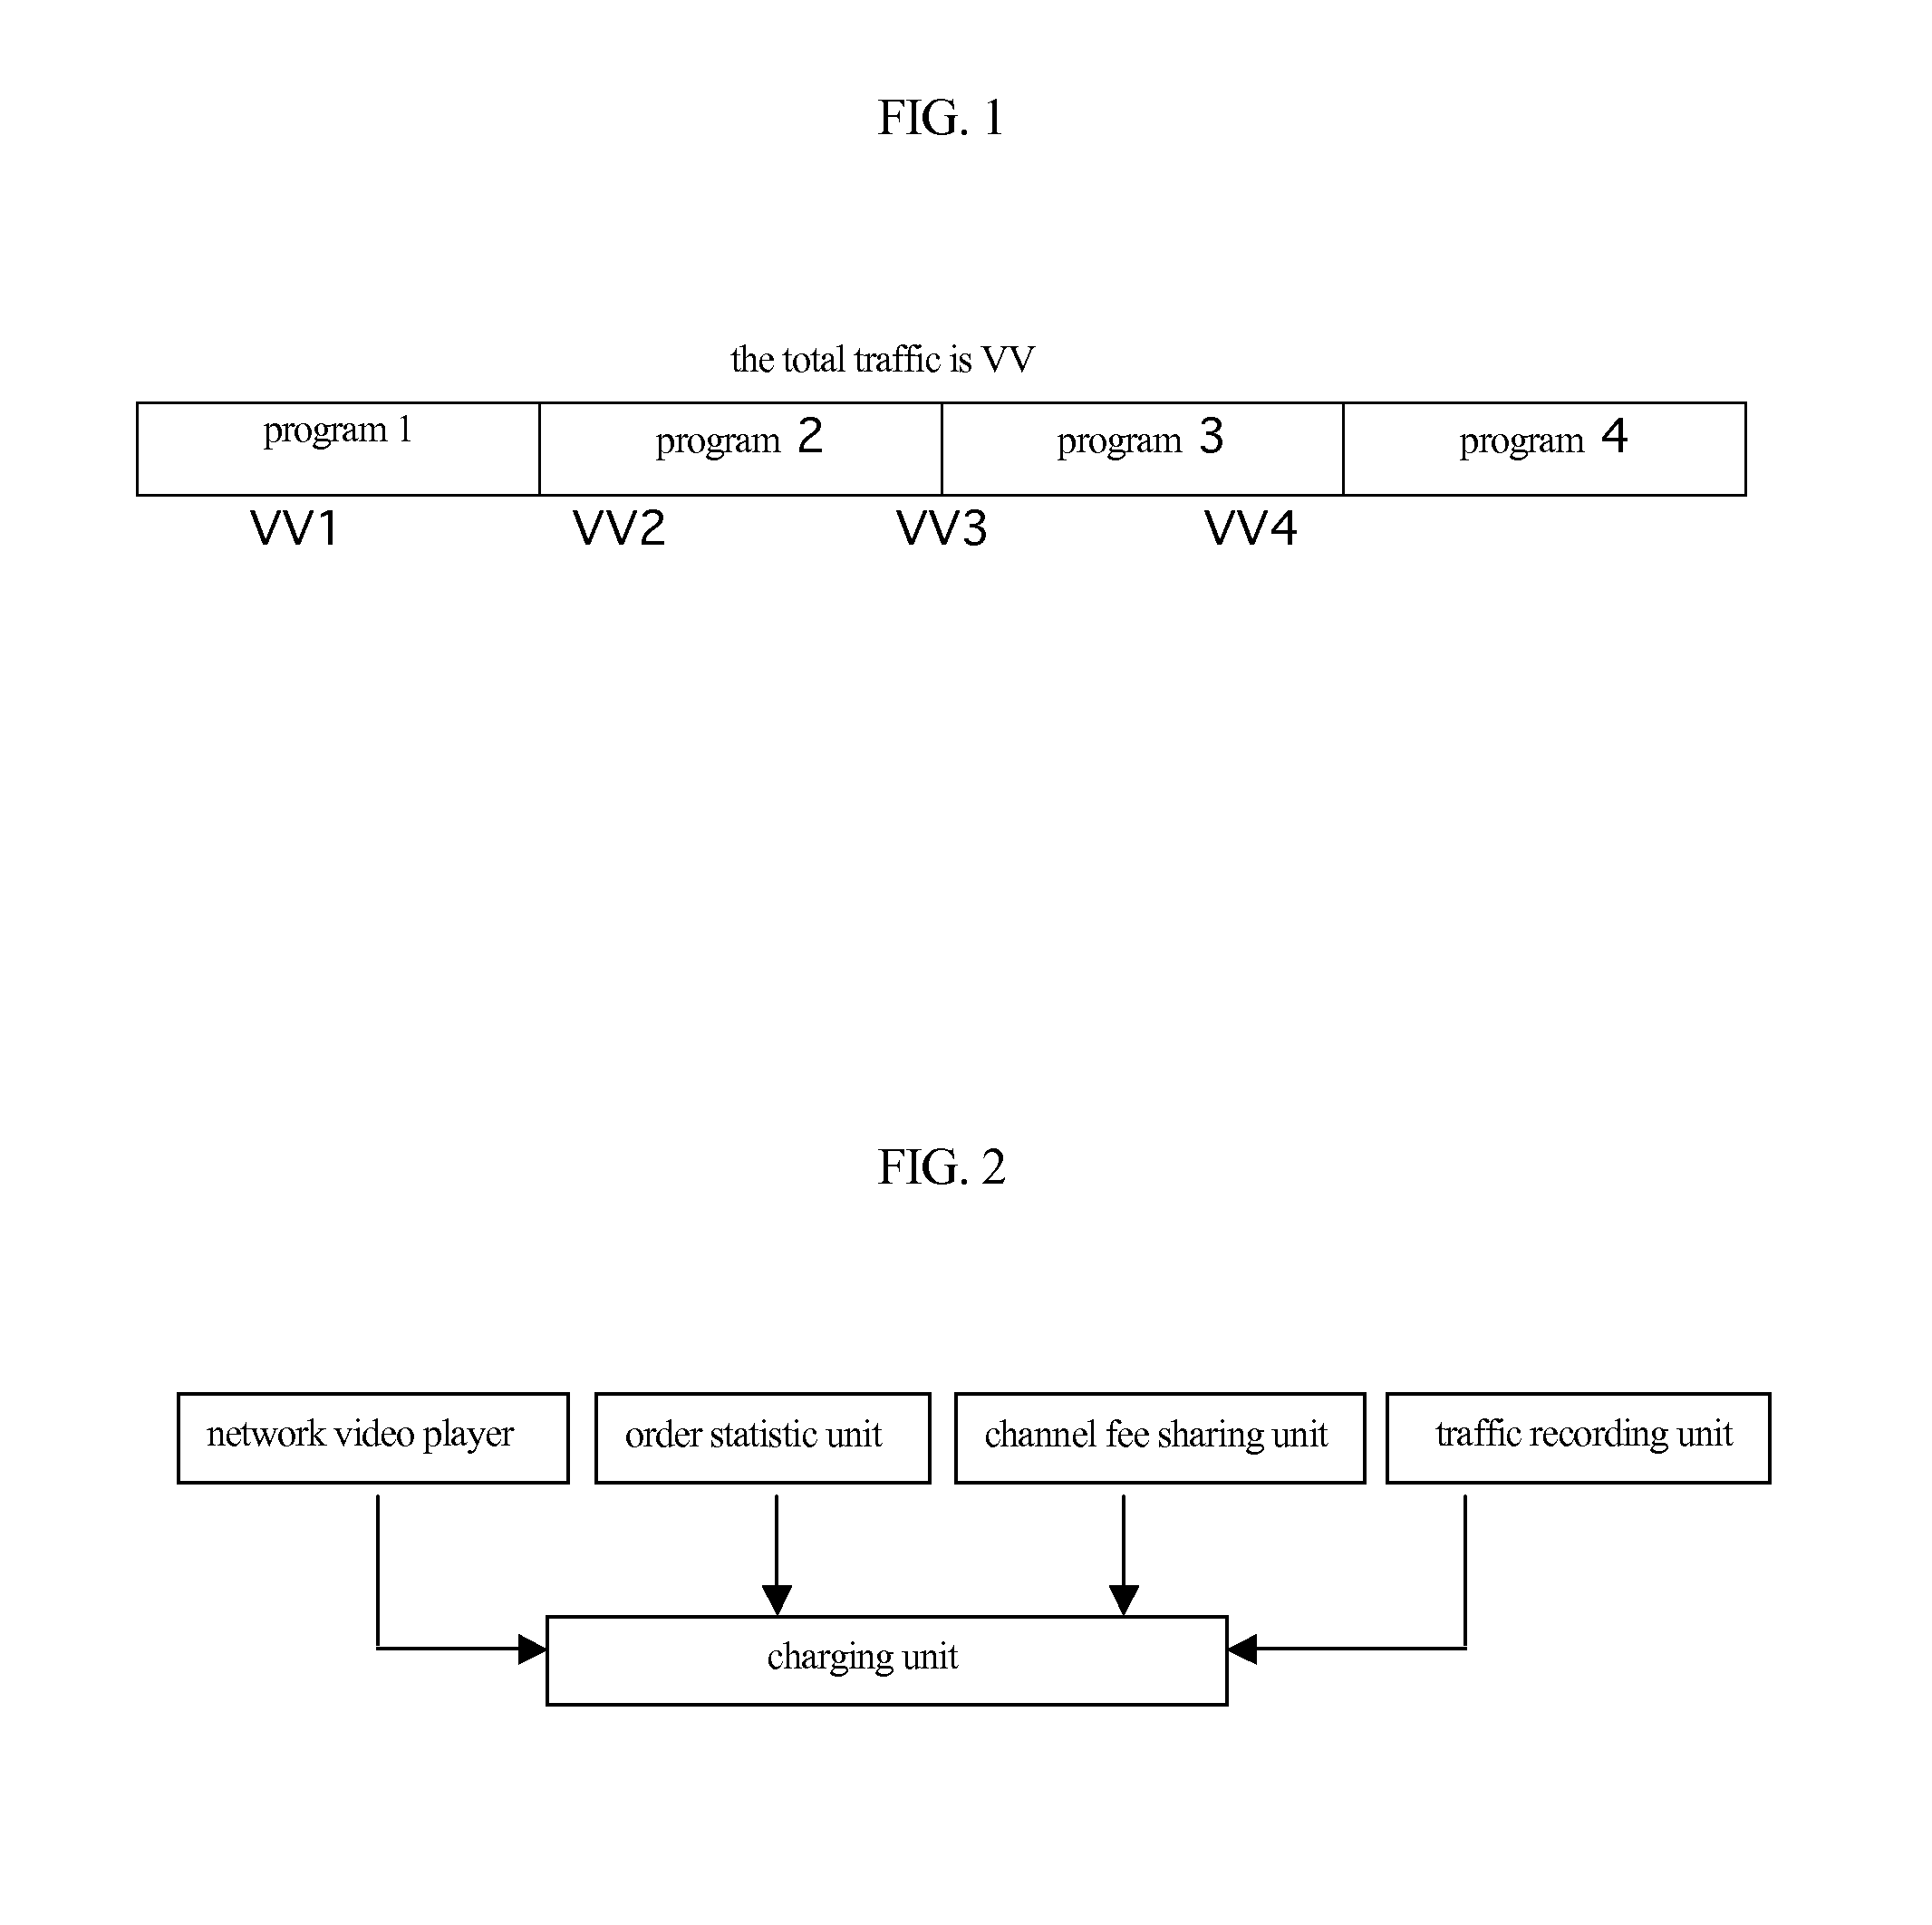 Method and System for Charging and Fee Sharing According to Network Video Playing Amount